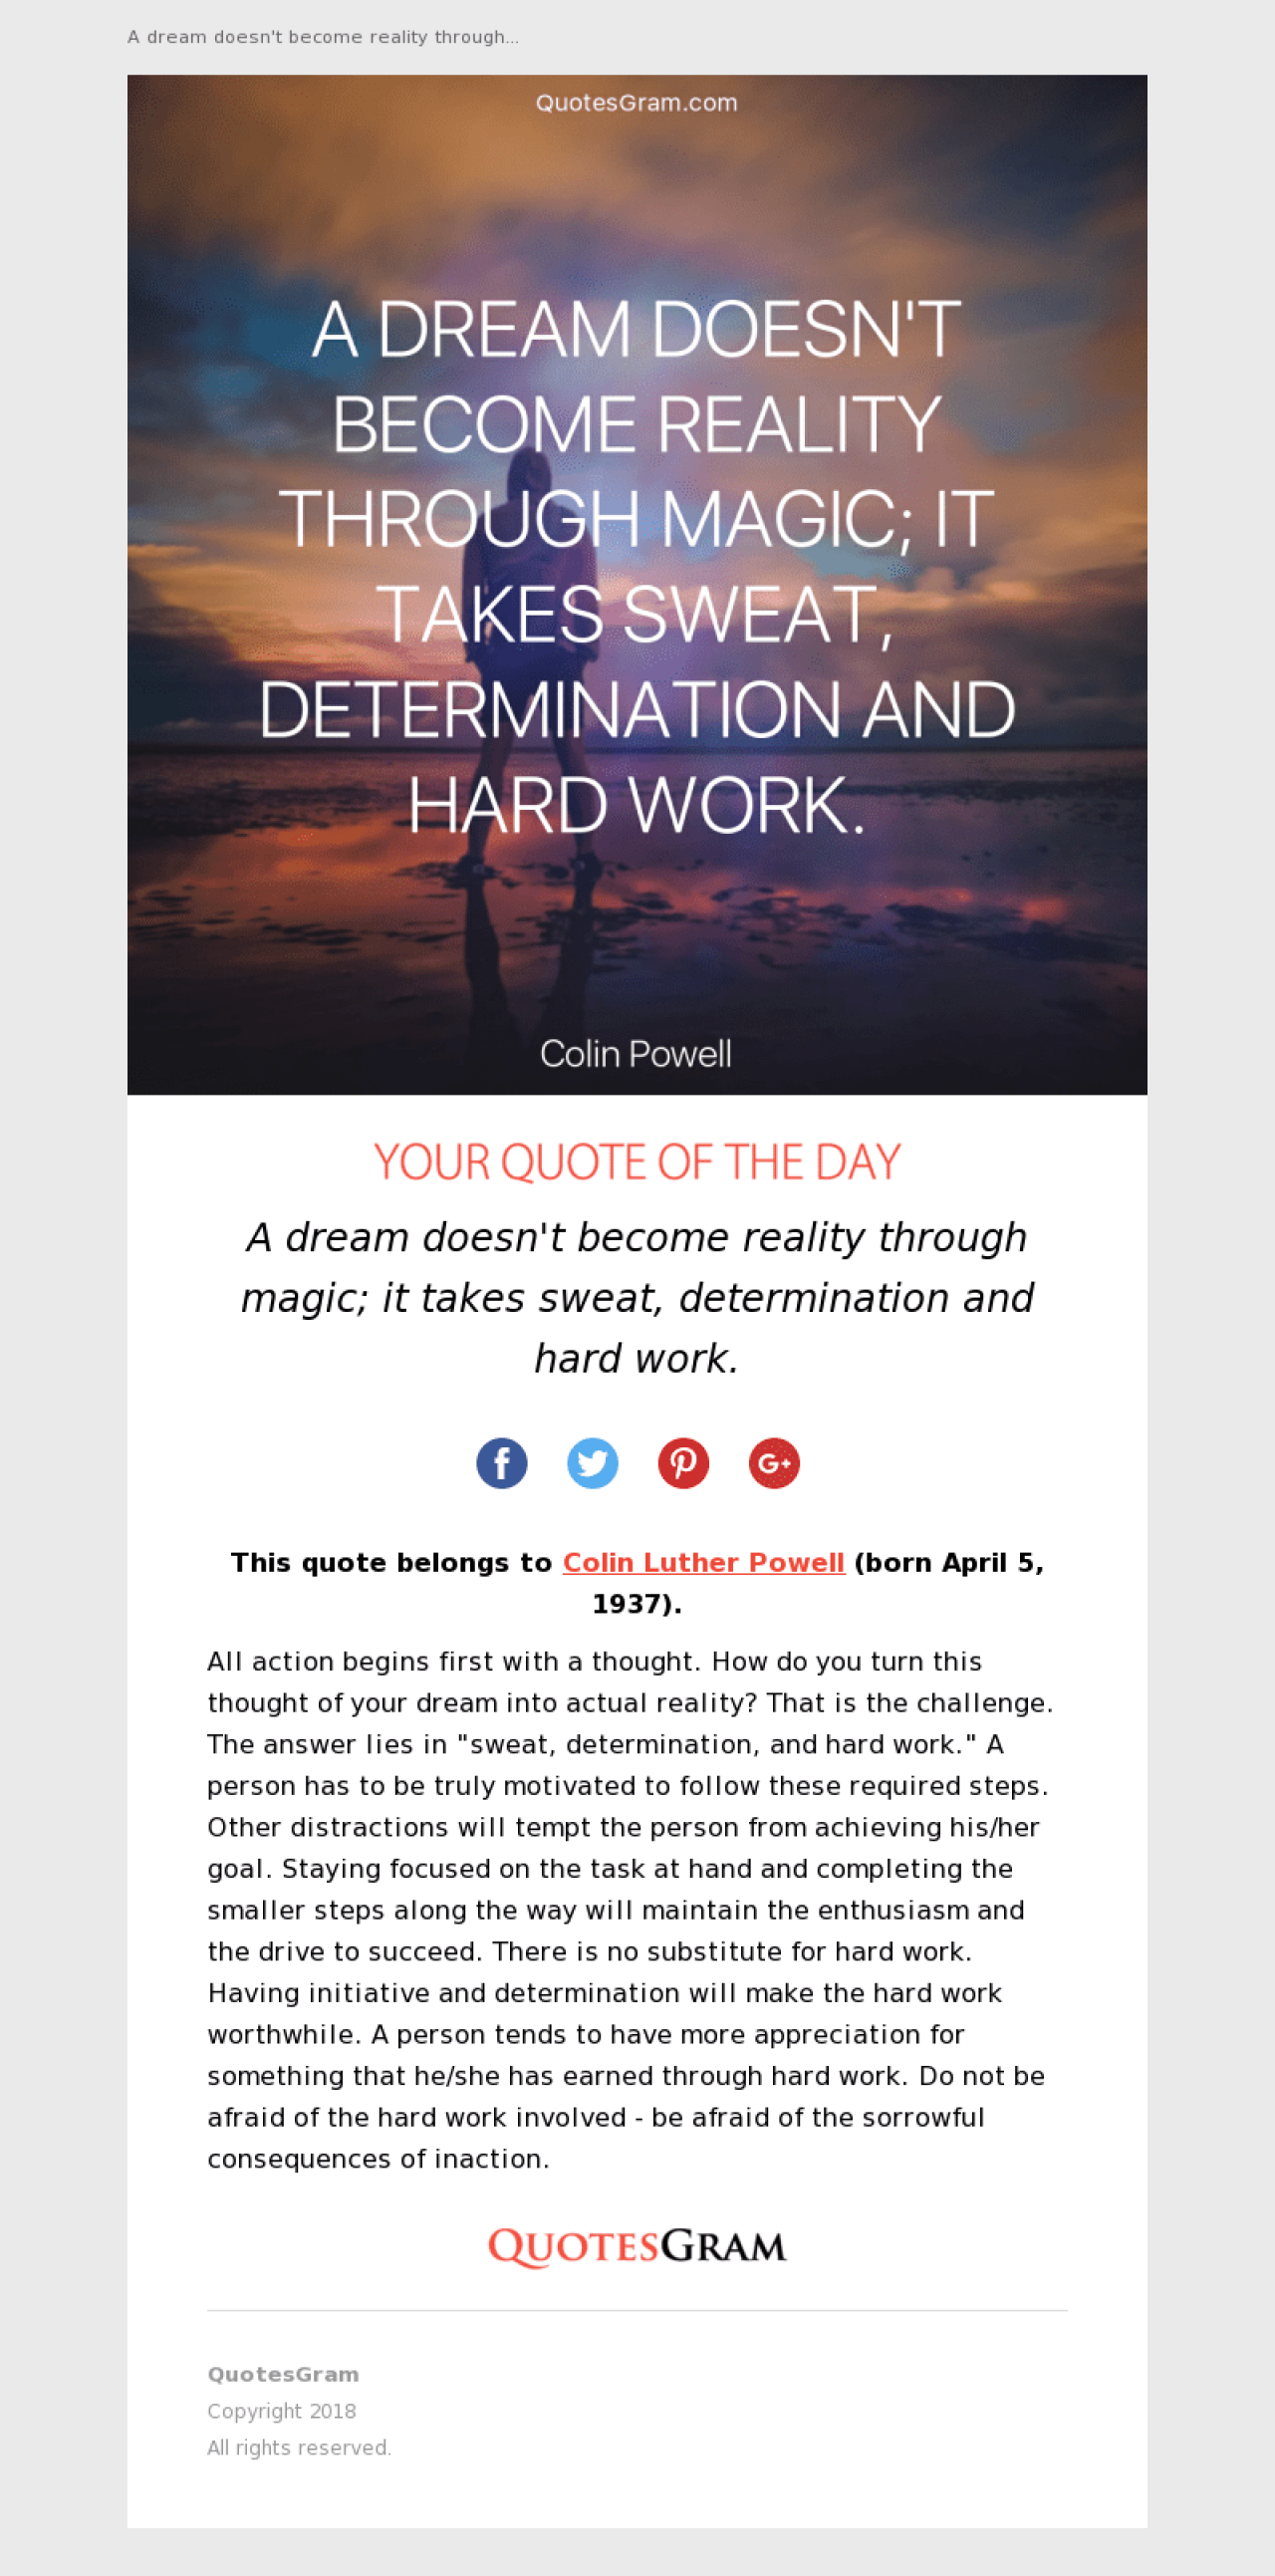 QuotesGram example - Made with MailerLite